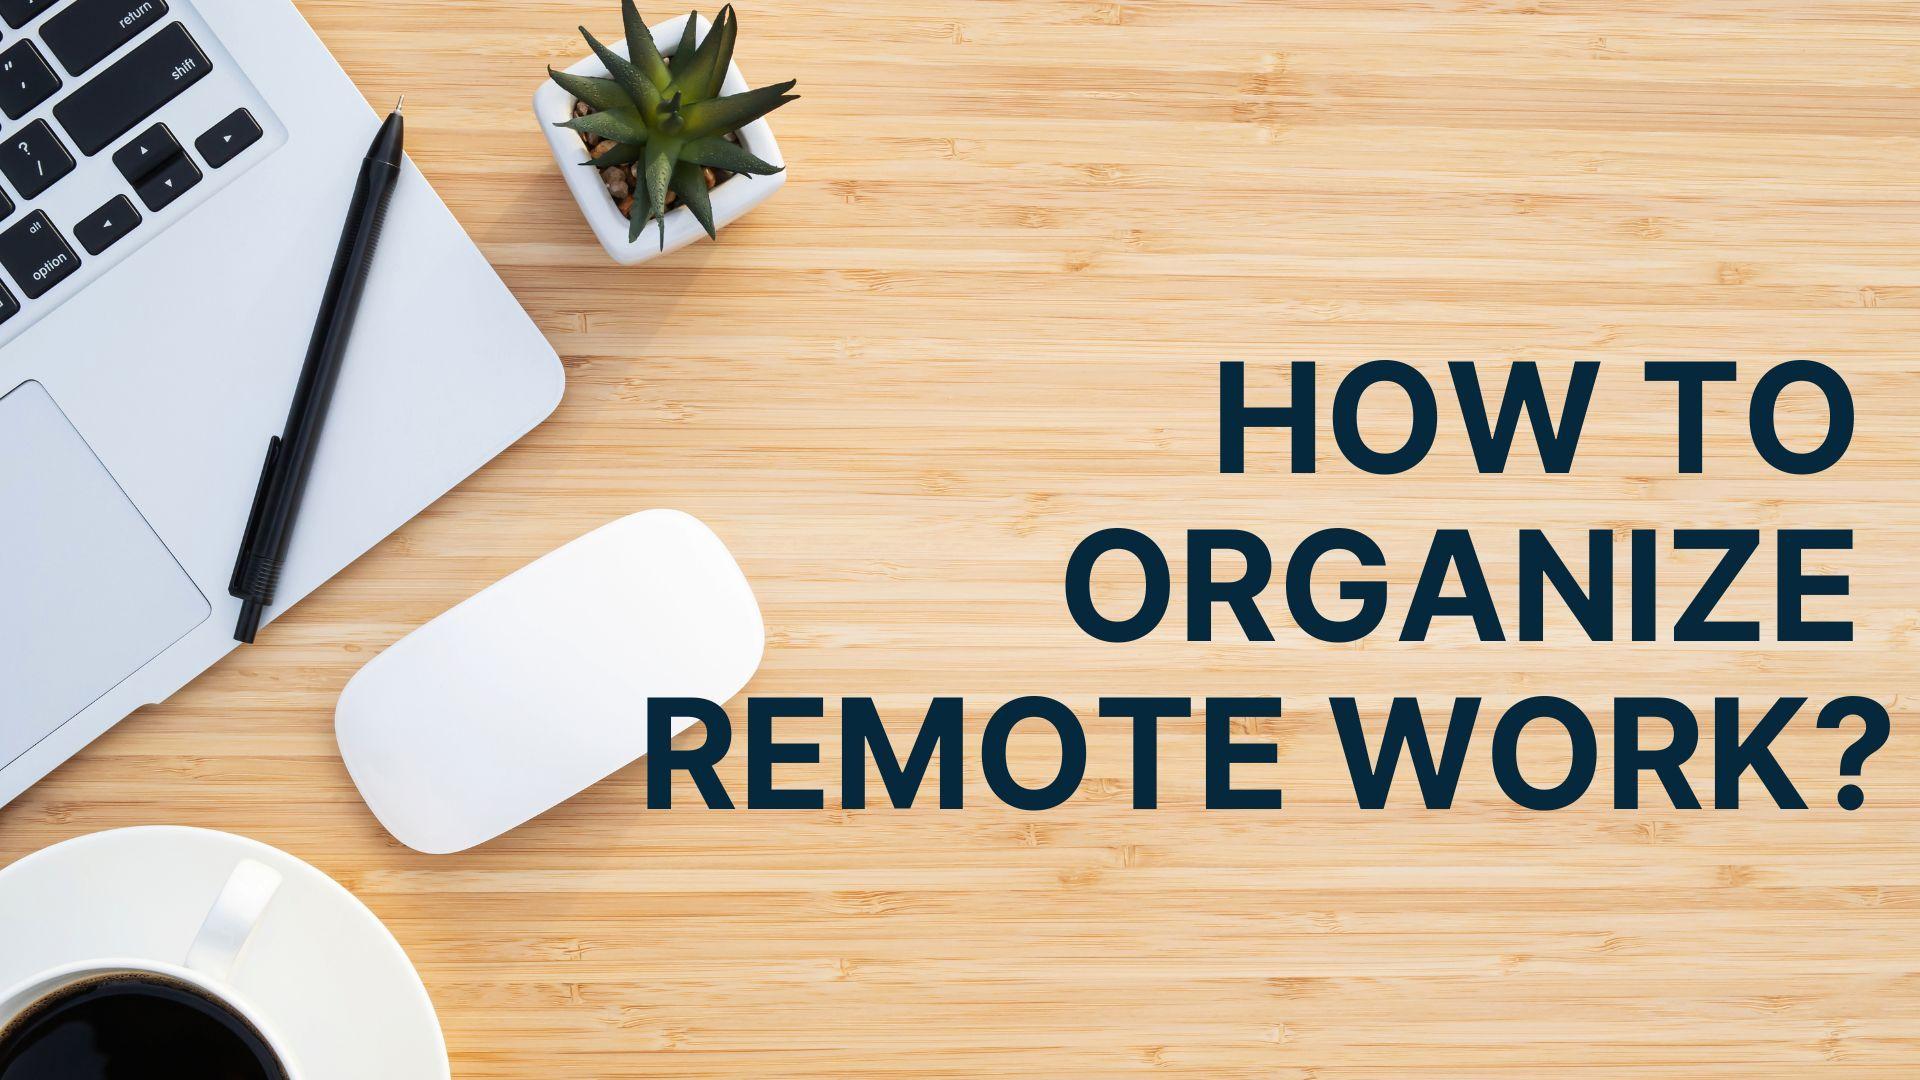 How-to-organize-remote-work